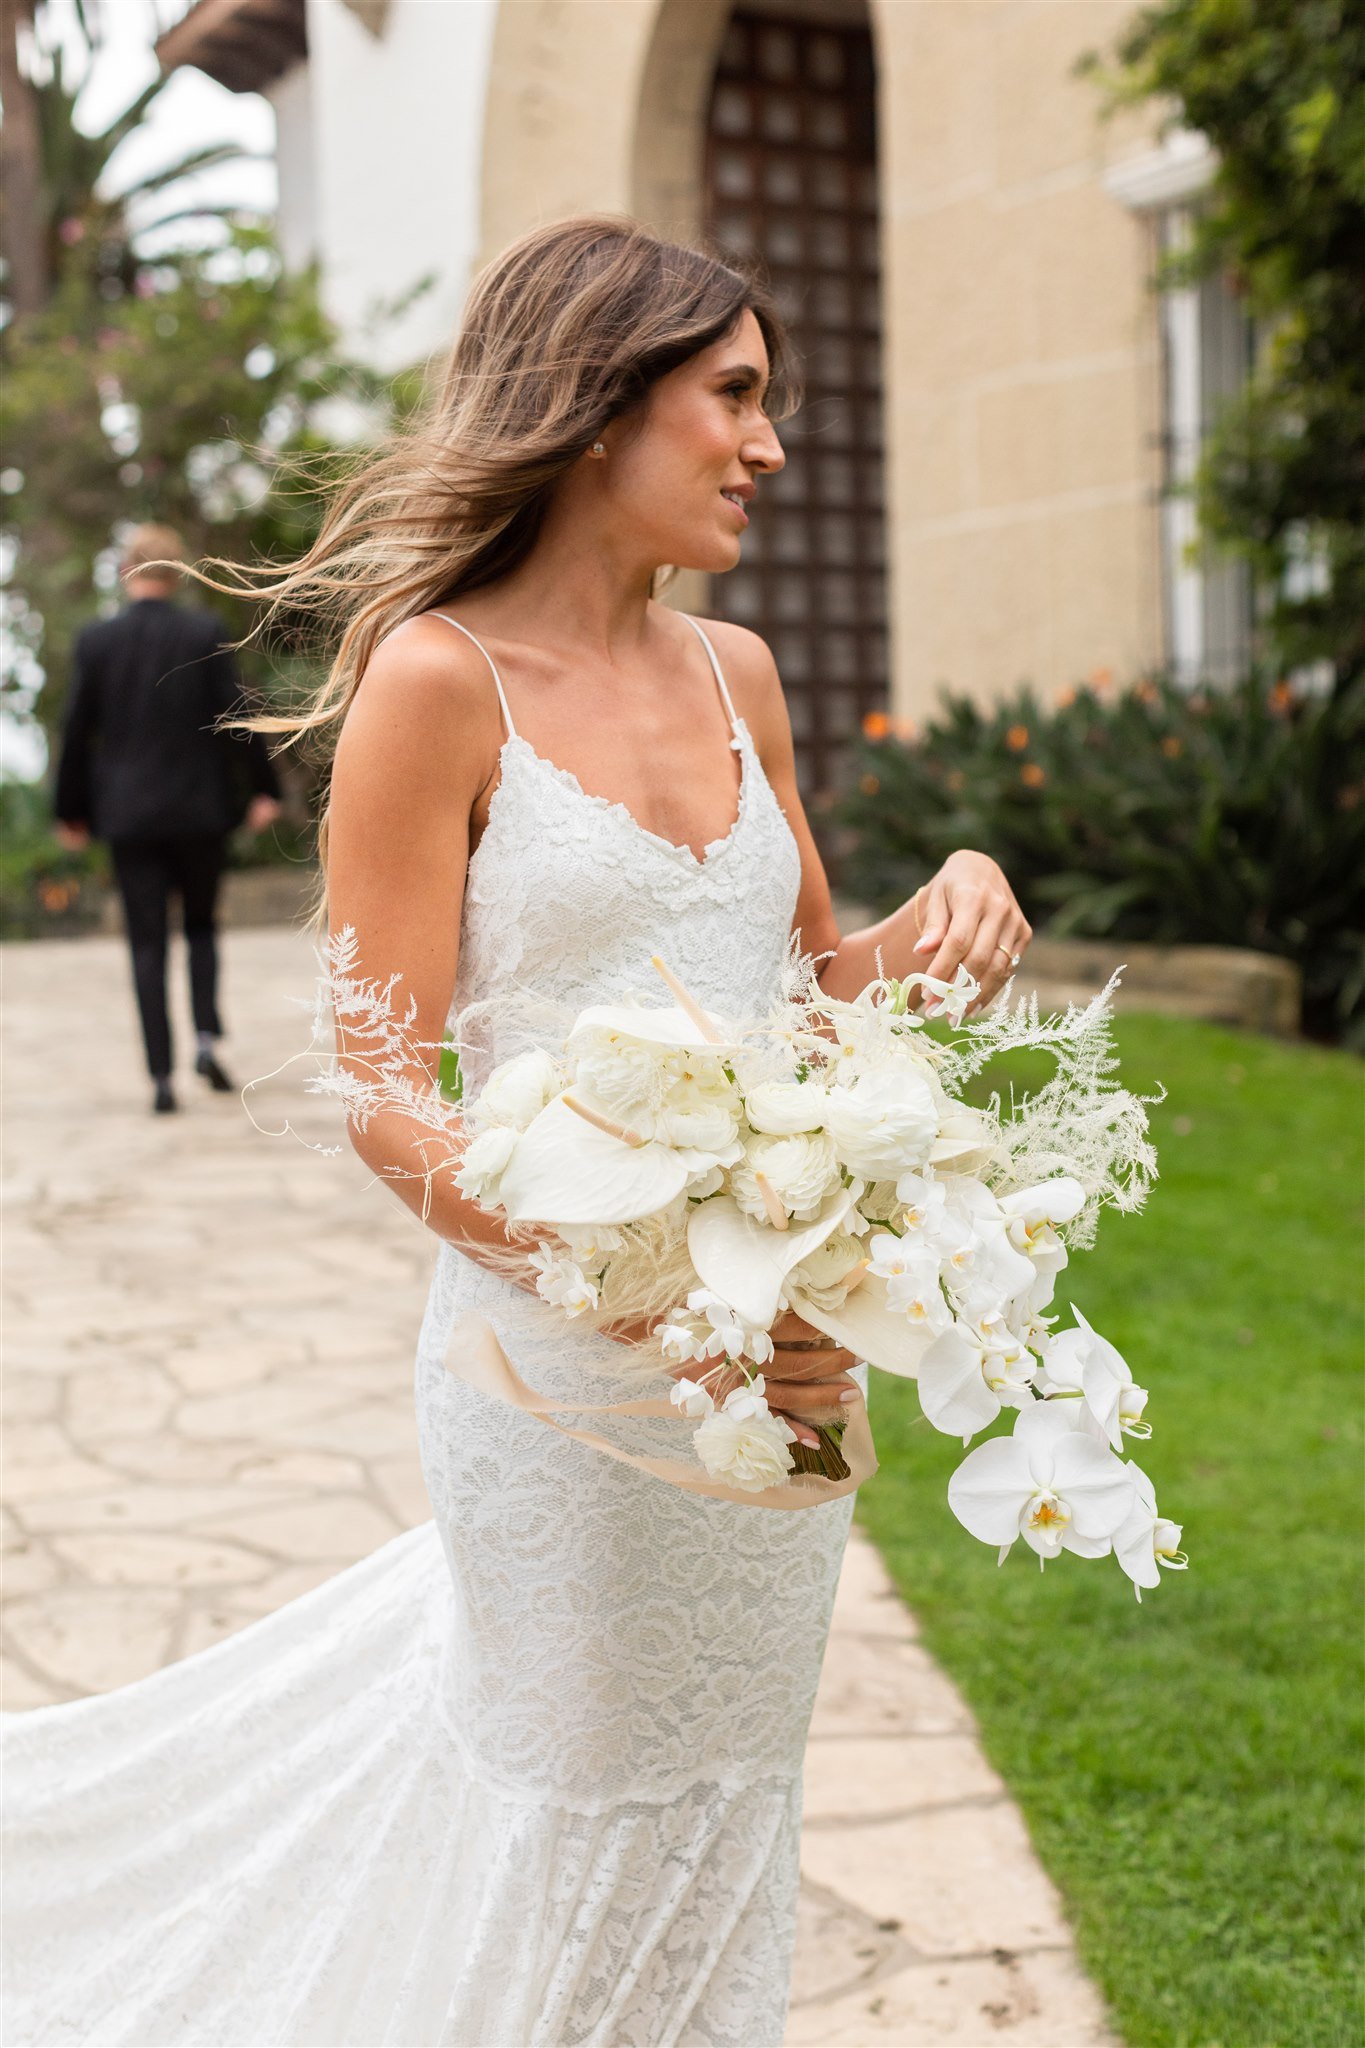 www.santabarbarawedding.com | Events by Fran | Wonder Tribe | Santa Barbara Courthouse | Beauty by Leah Rose | Amari Salon &amp; Spa | Wild West Florals | Bride with Bouquet